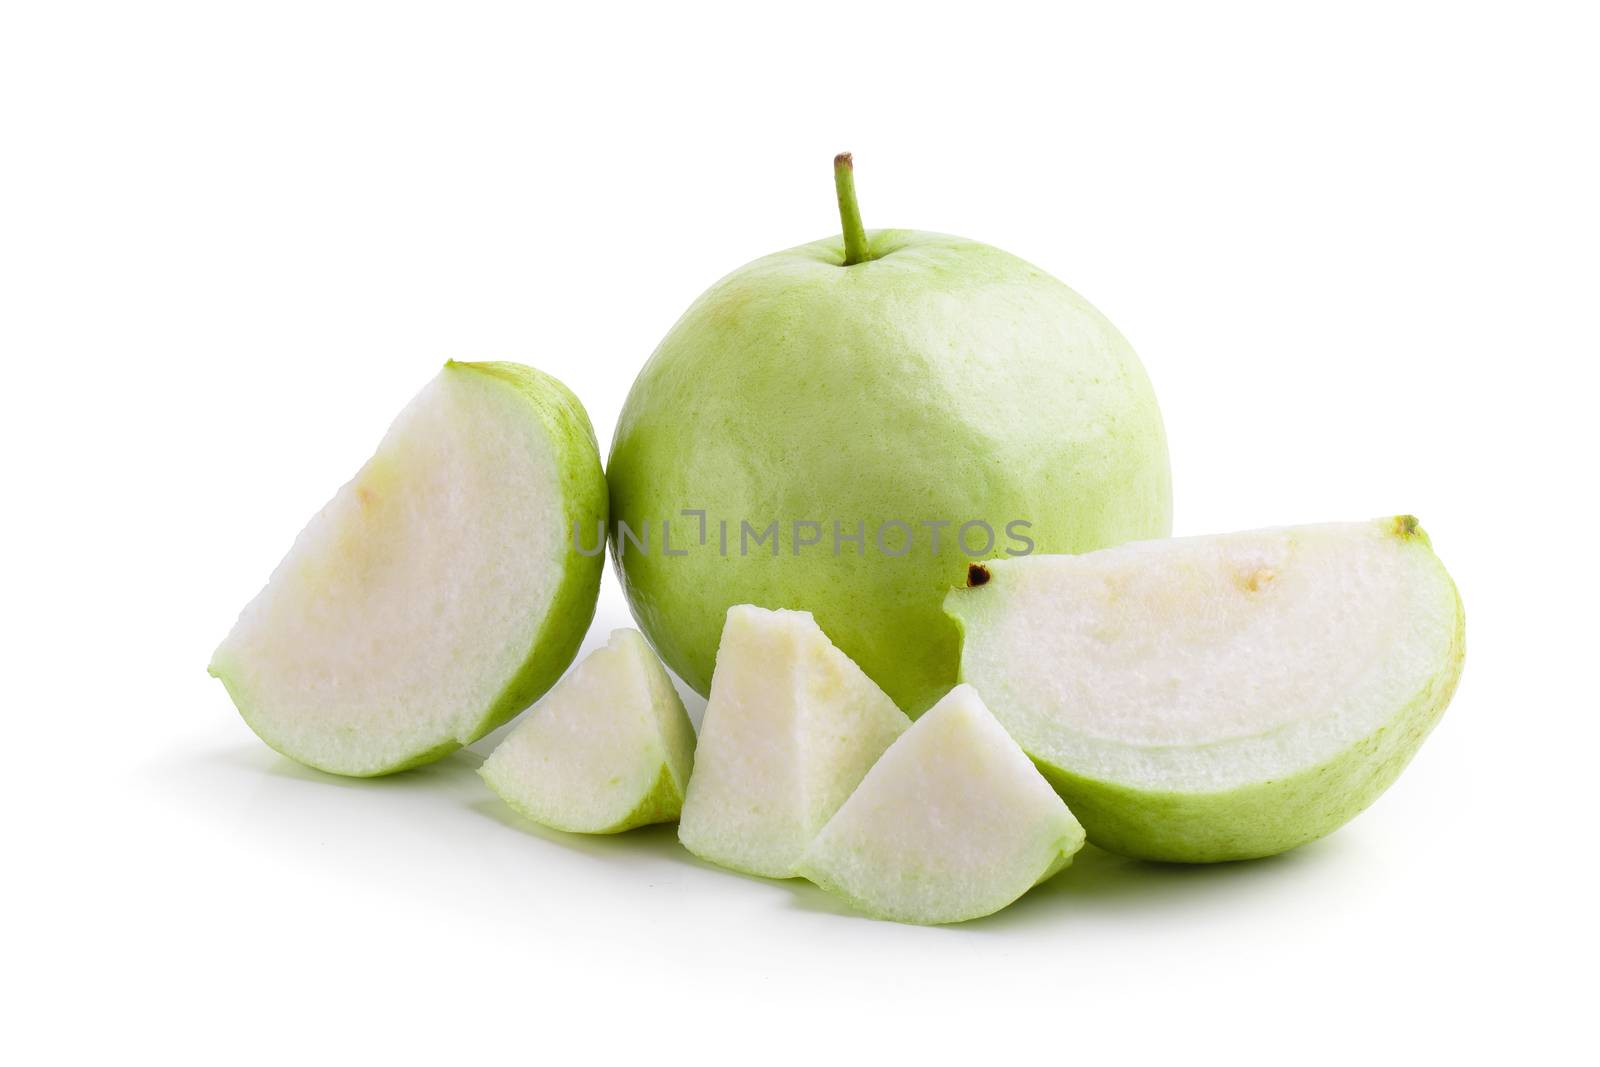 Guava fruit isolated on a white background.